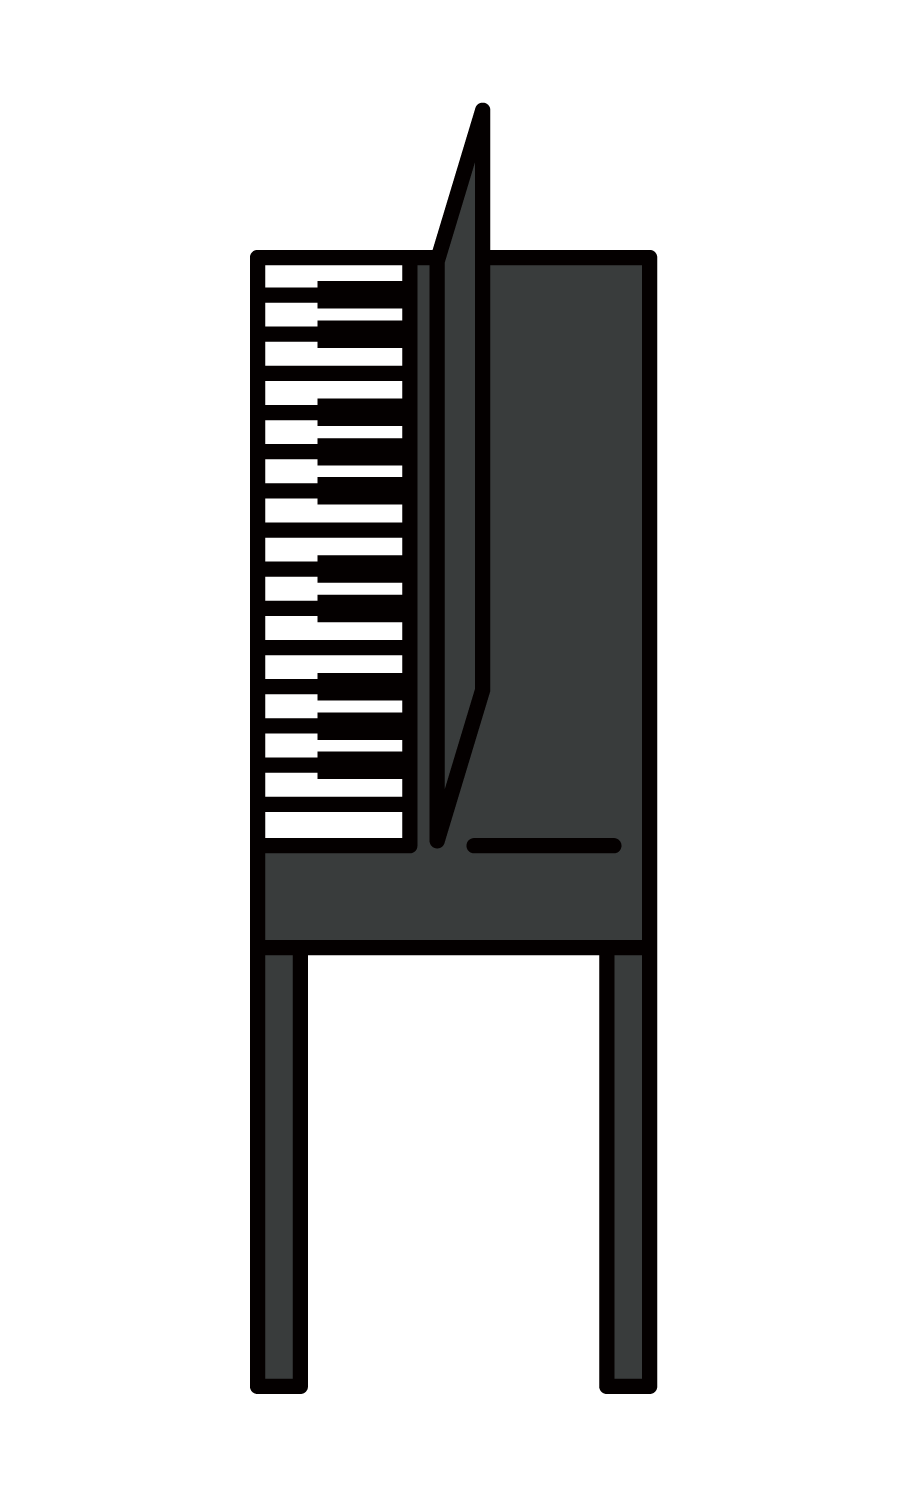 Illustration of a piano instructor (female)